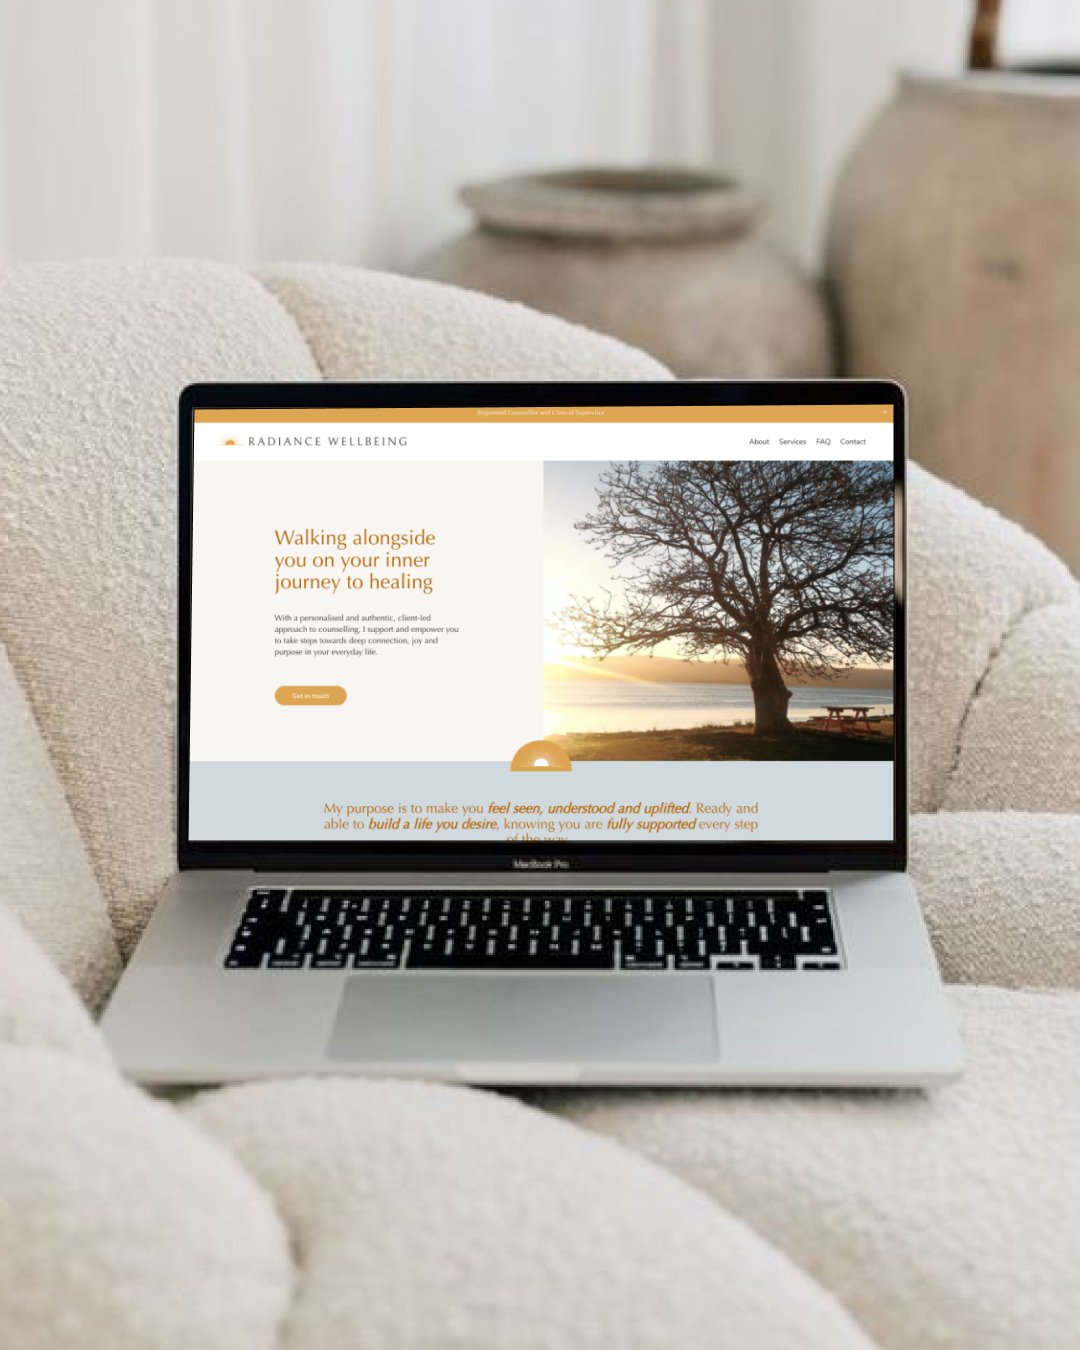 New website launch!

Introducing Radiance Wellbeing &ndash; Walking alongside you on your inner journey to healing.

Christina, the heart &amp; soul of Radiance Wellbeing, approached me to craft a digital presence that not only attracts new clients b